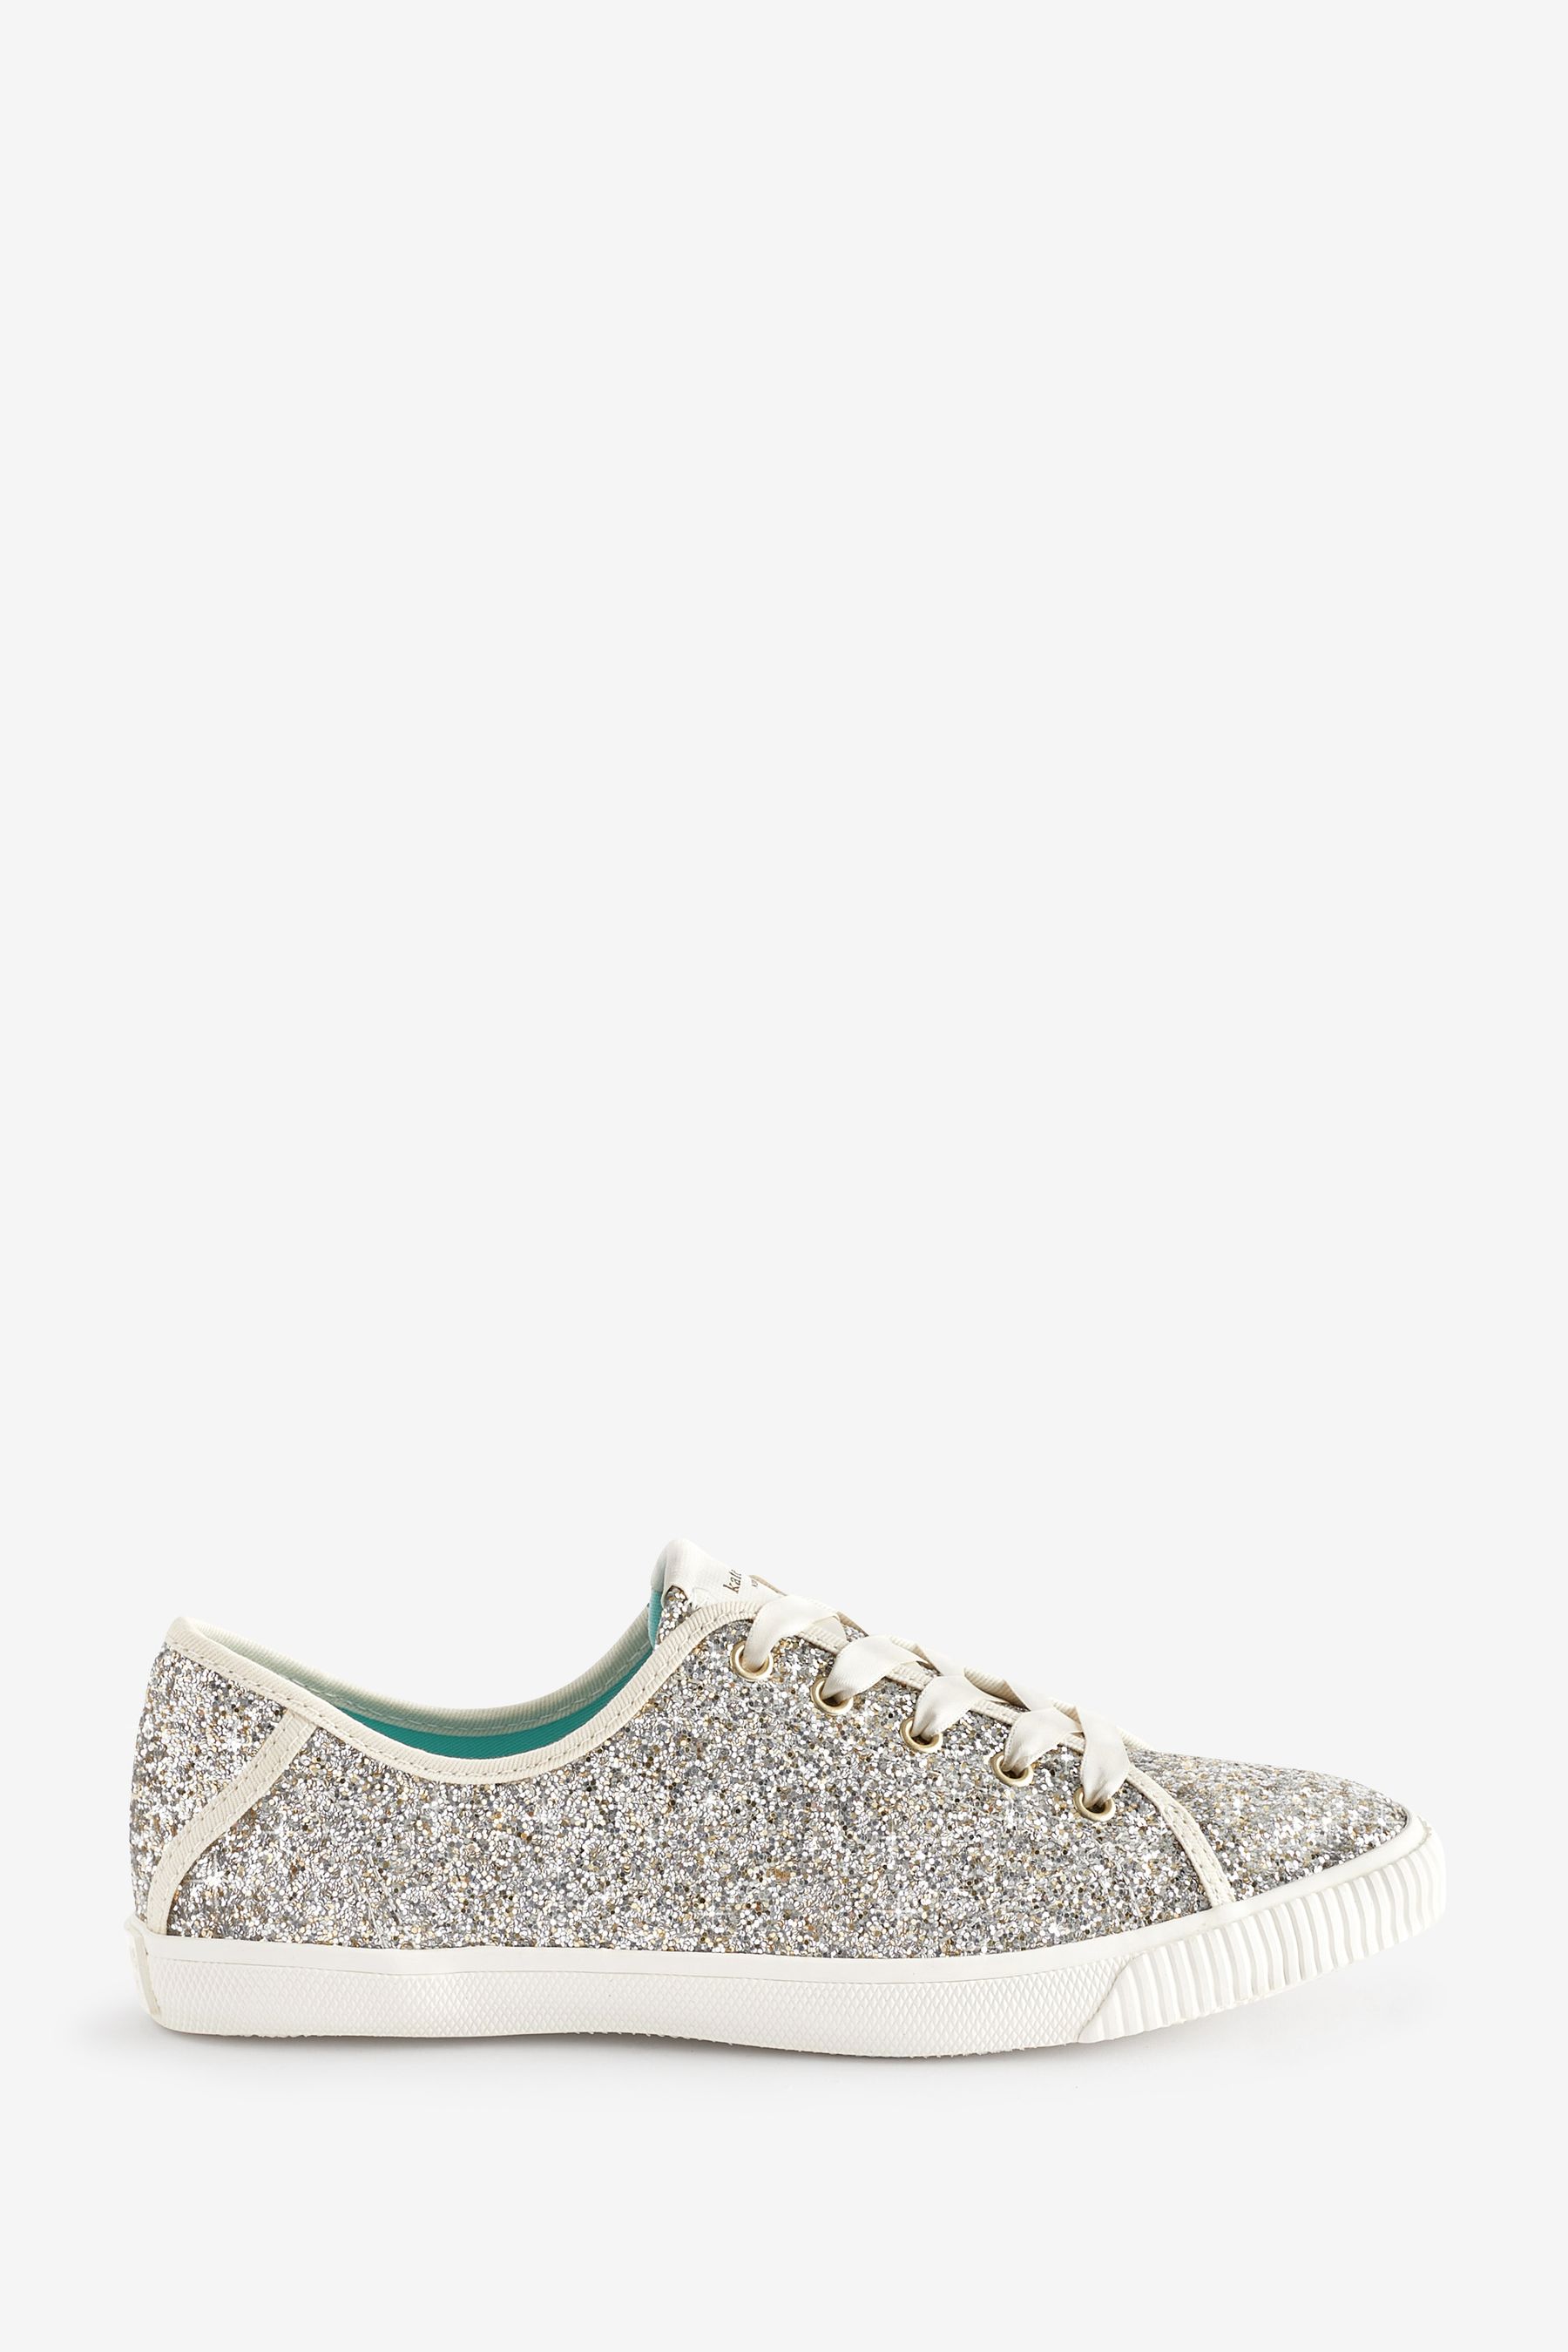 Buy kate spade new york Silver Trista Sequin Trainers from the Next UK ...